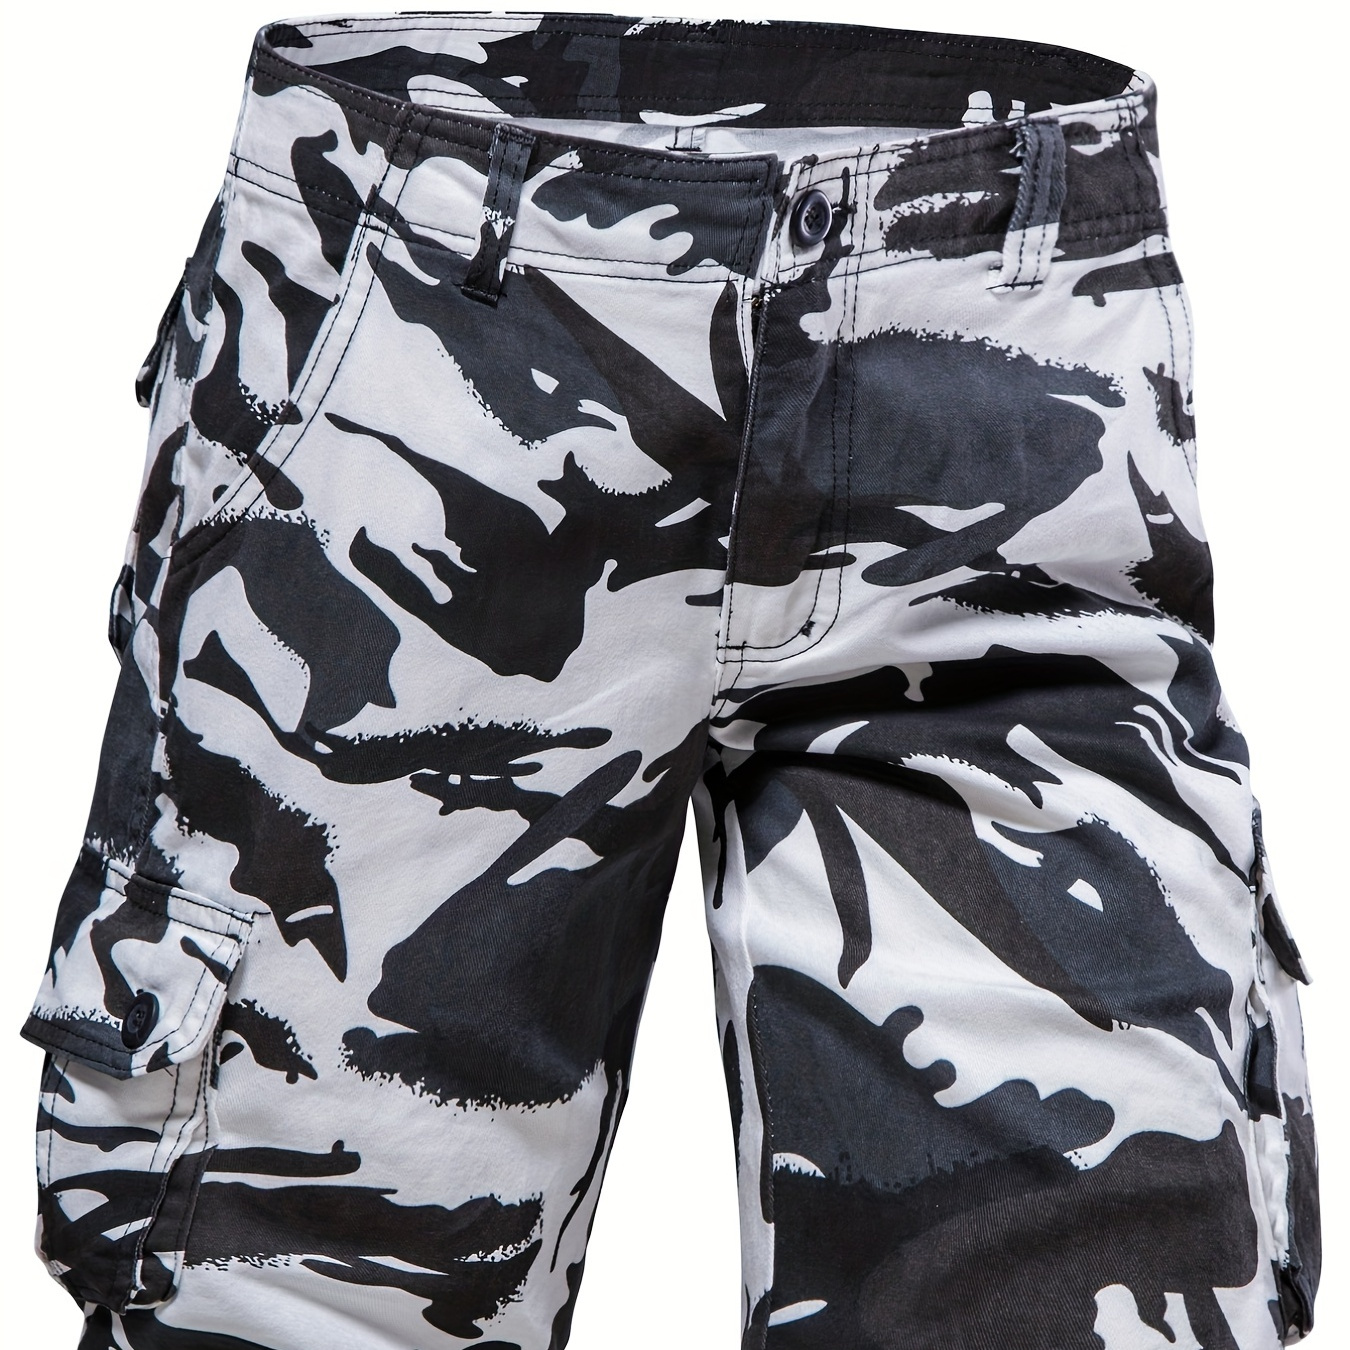 

Solid Cotton Street Style Men's Casual Camo Pattern Cargo Shorts With Pocket, Men's Outfits